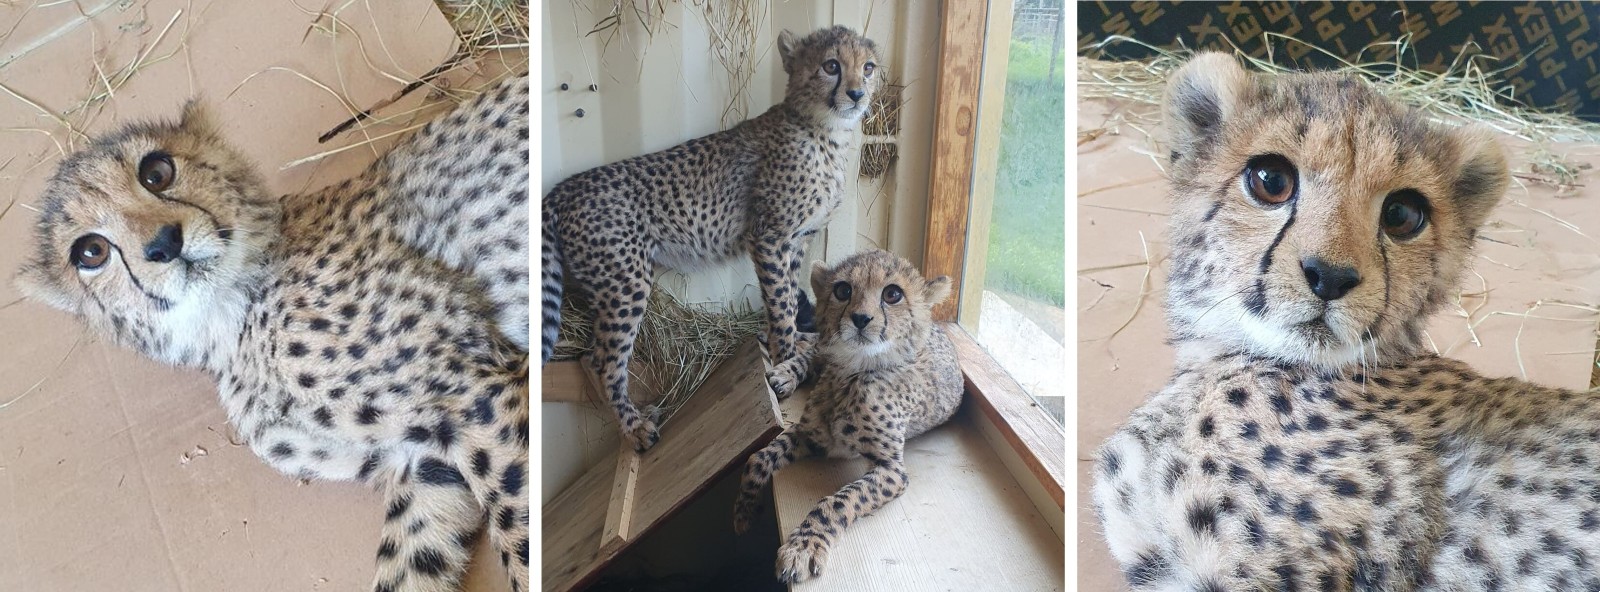 Three images of cheetah cubs looking healthy and happy at their sanctuary home